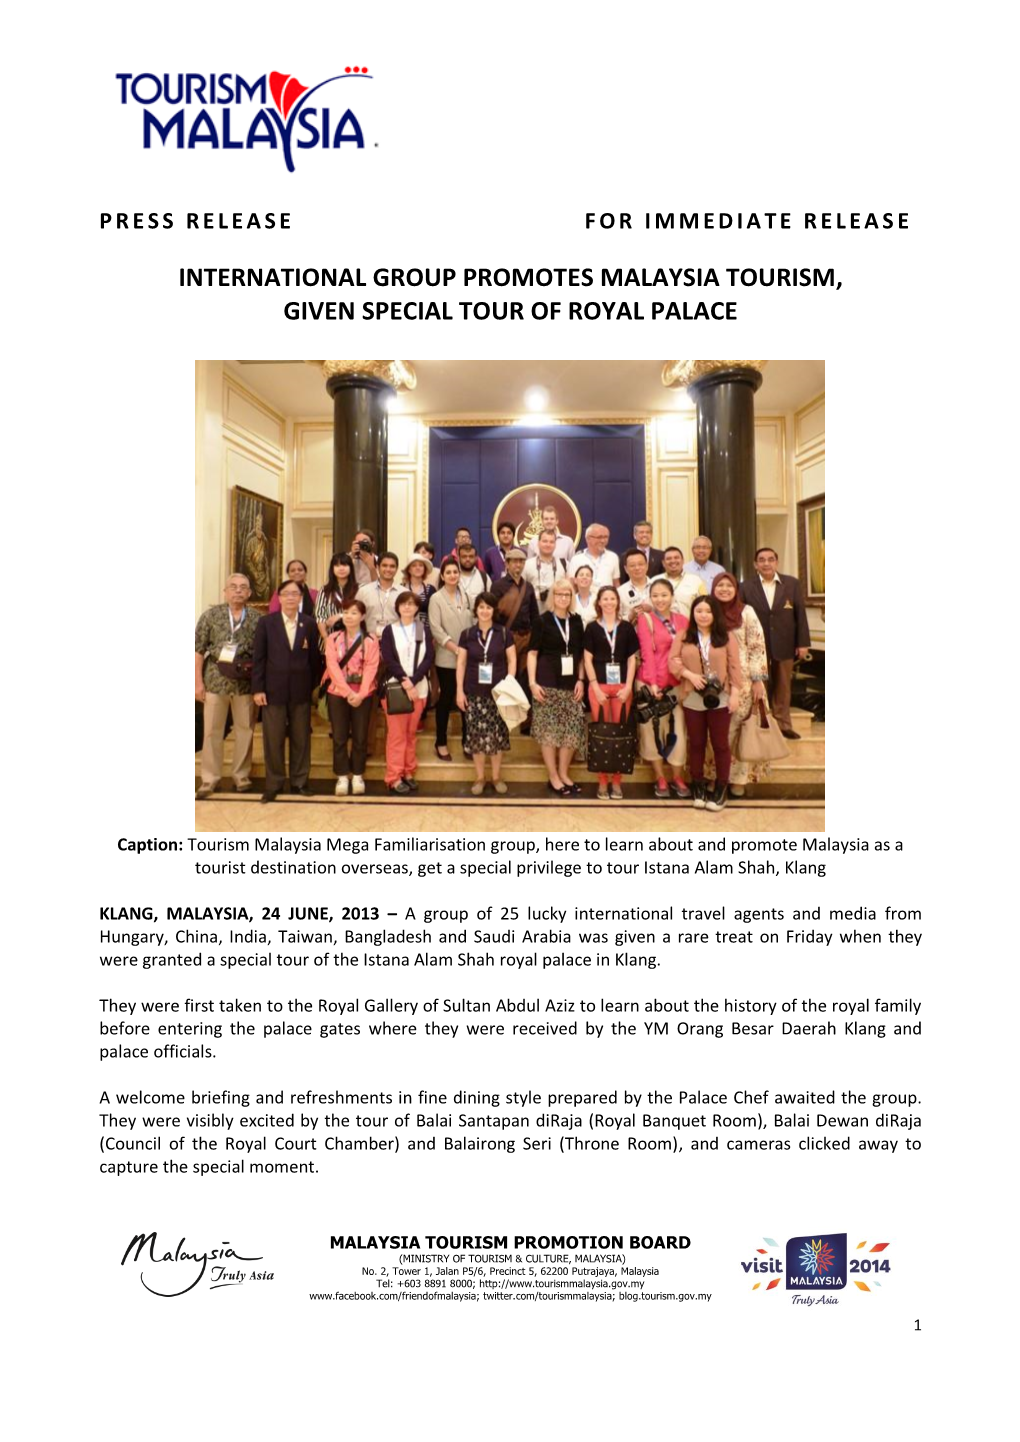 International Group Promotes Malaysia Tourism, Given Special Tour of Royal Palace